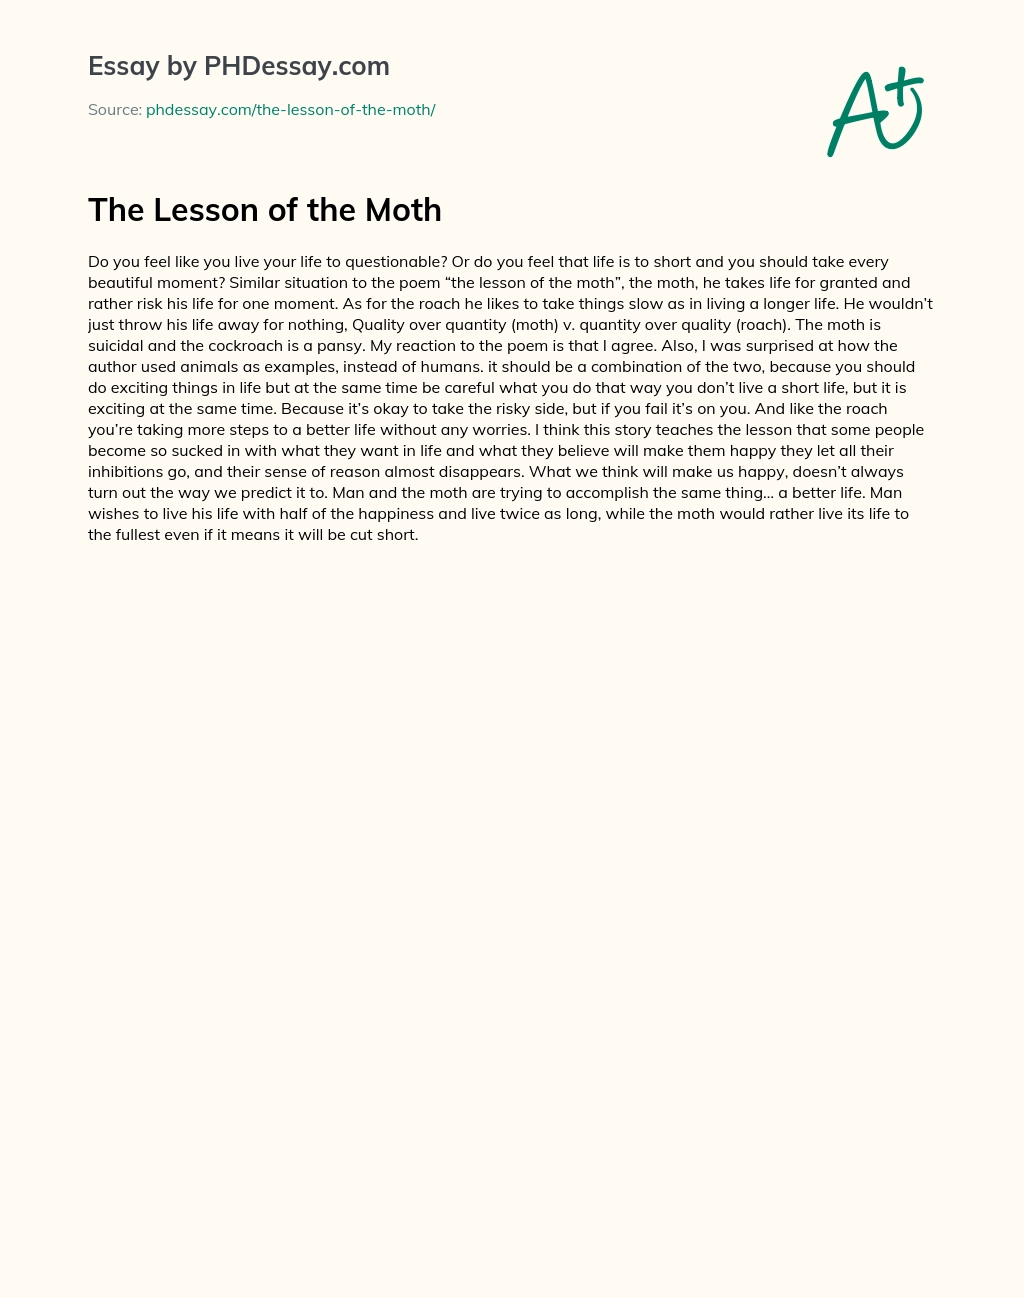 The Lesson of the Moth essay